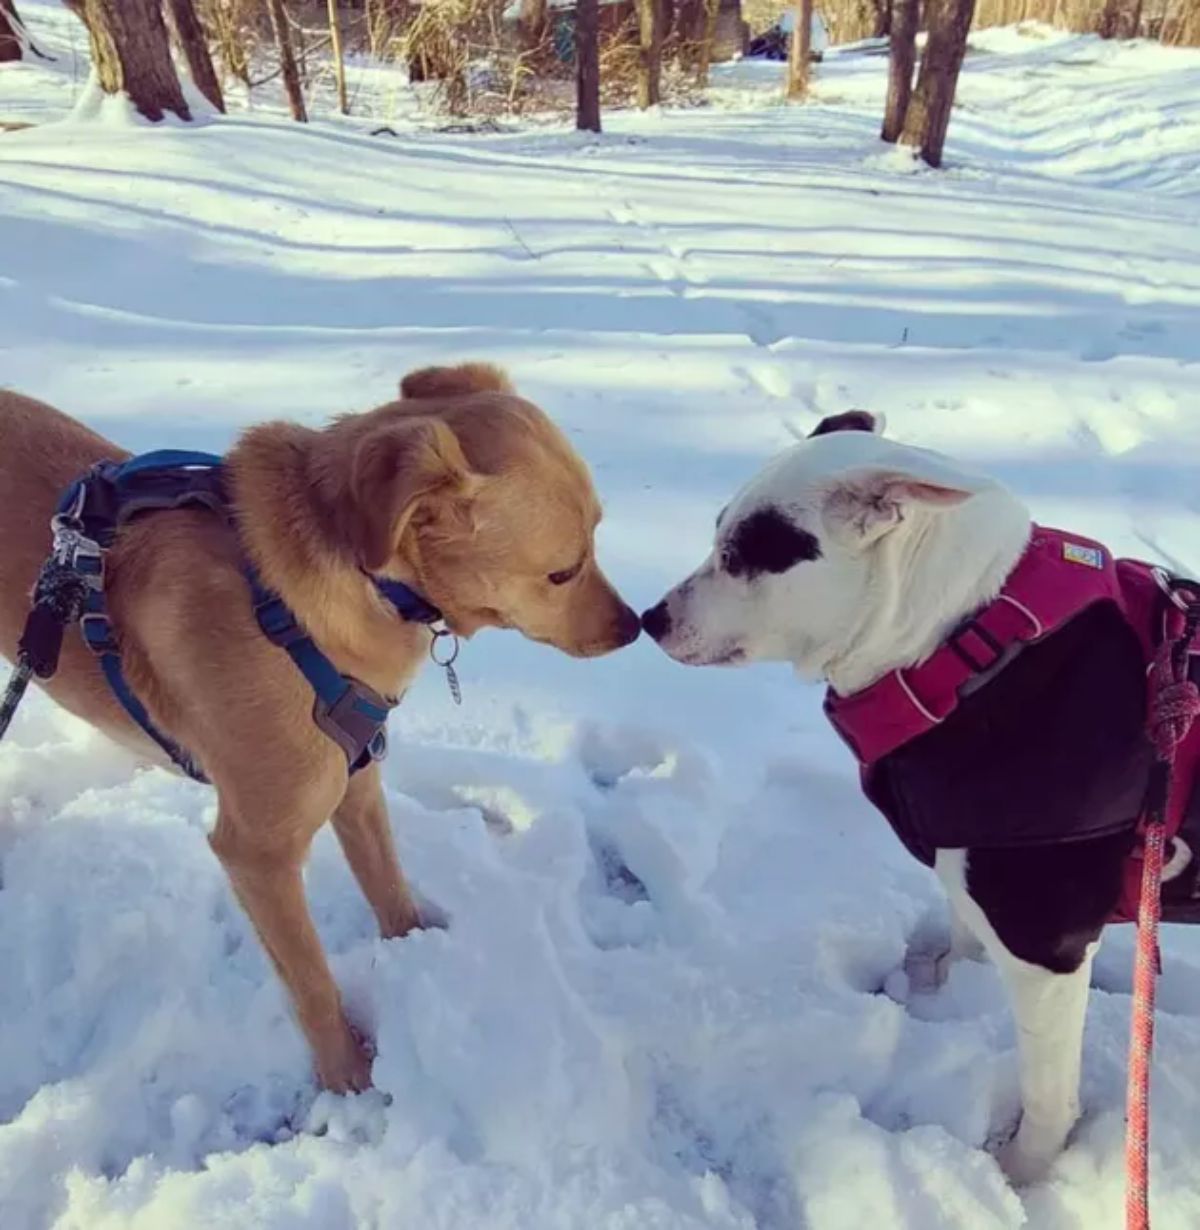 brown dog and black and white dog booping each other on the noses while standing in snow